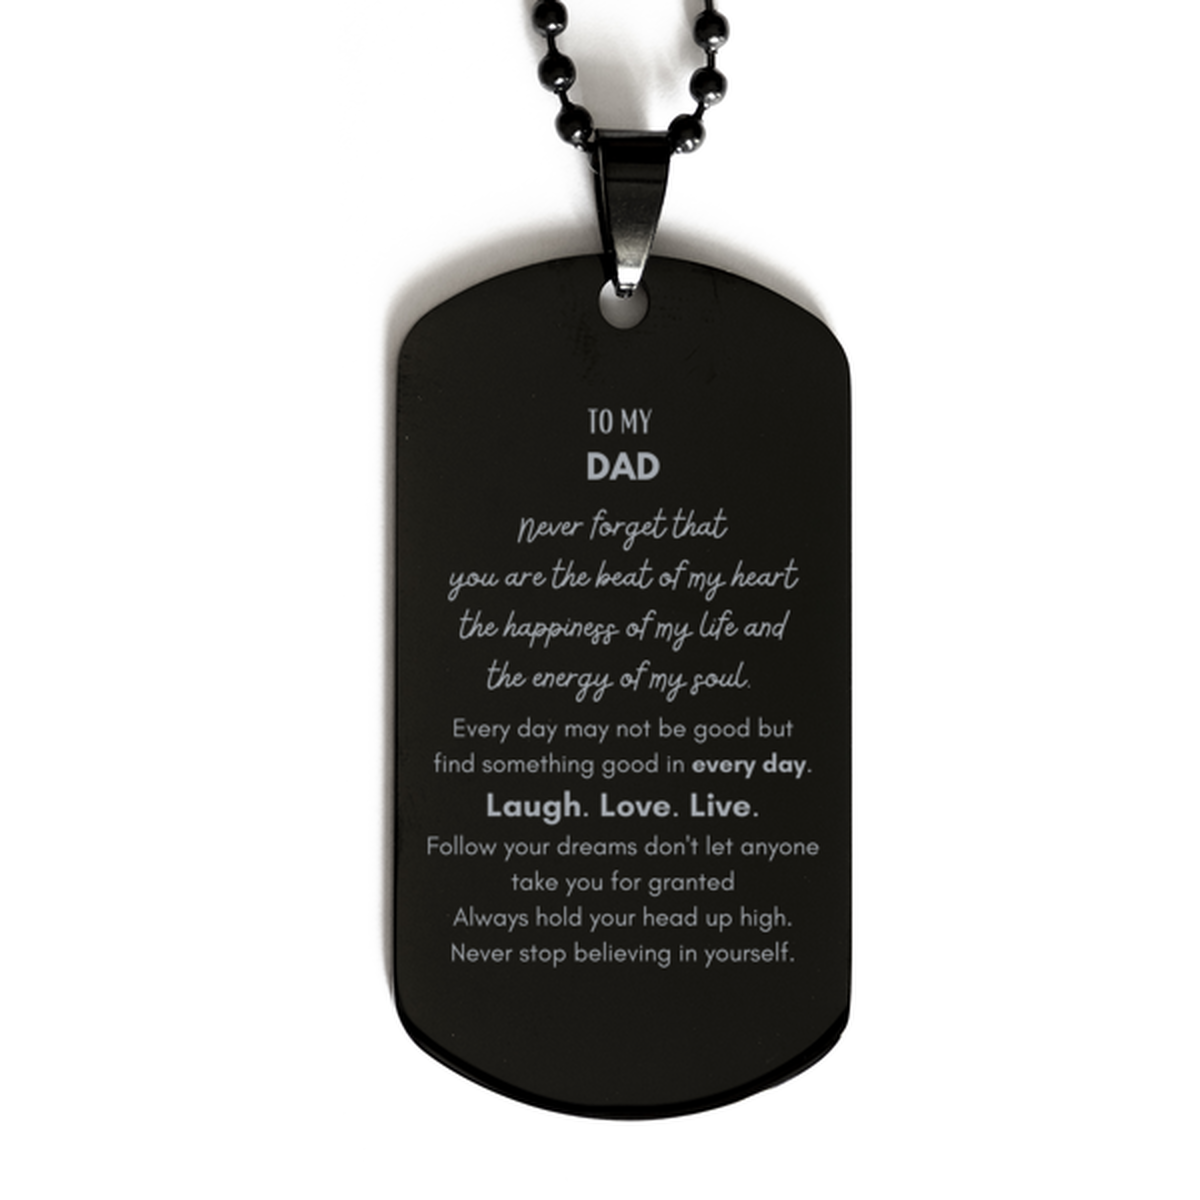 To My Dad Dogtag Gifts, Christmas Dad Black Dog Tag Present, Birthday Unique Motivational For Dad, To My Dad Never forget that you are the beat of my heart the happiness of my life and the energy of my soul